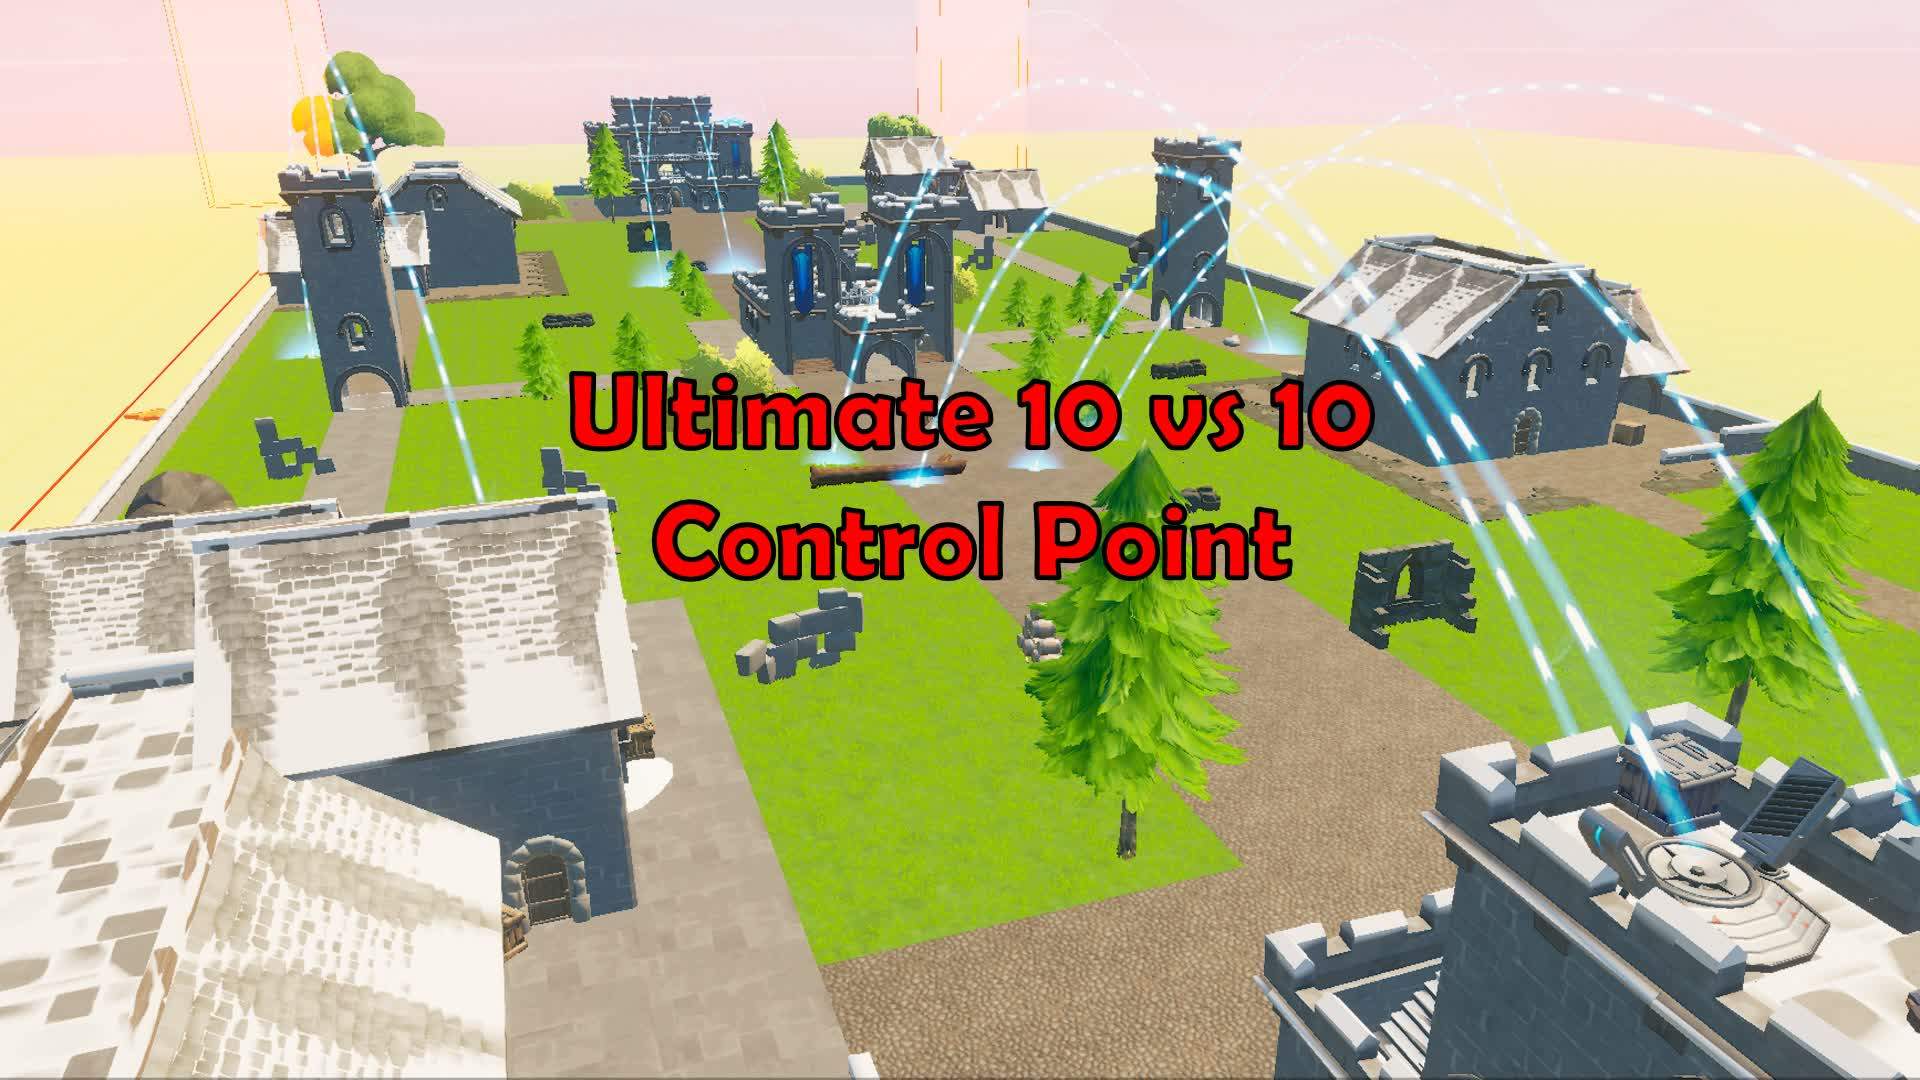 Ultimate 10 vs 10 Control Point